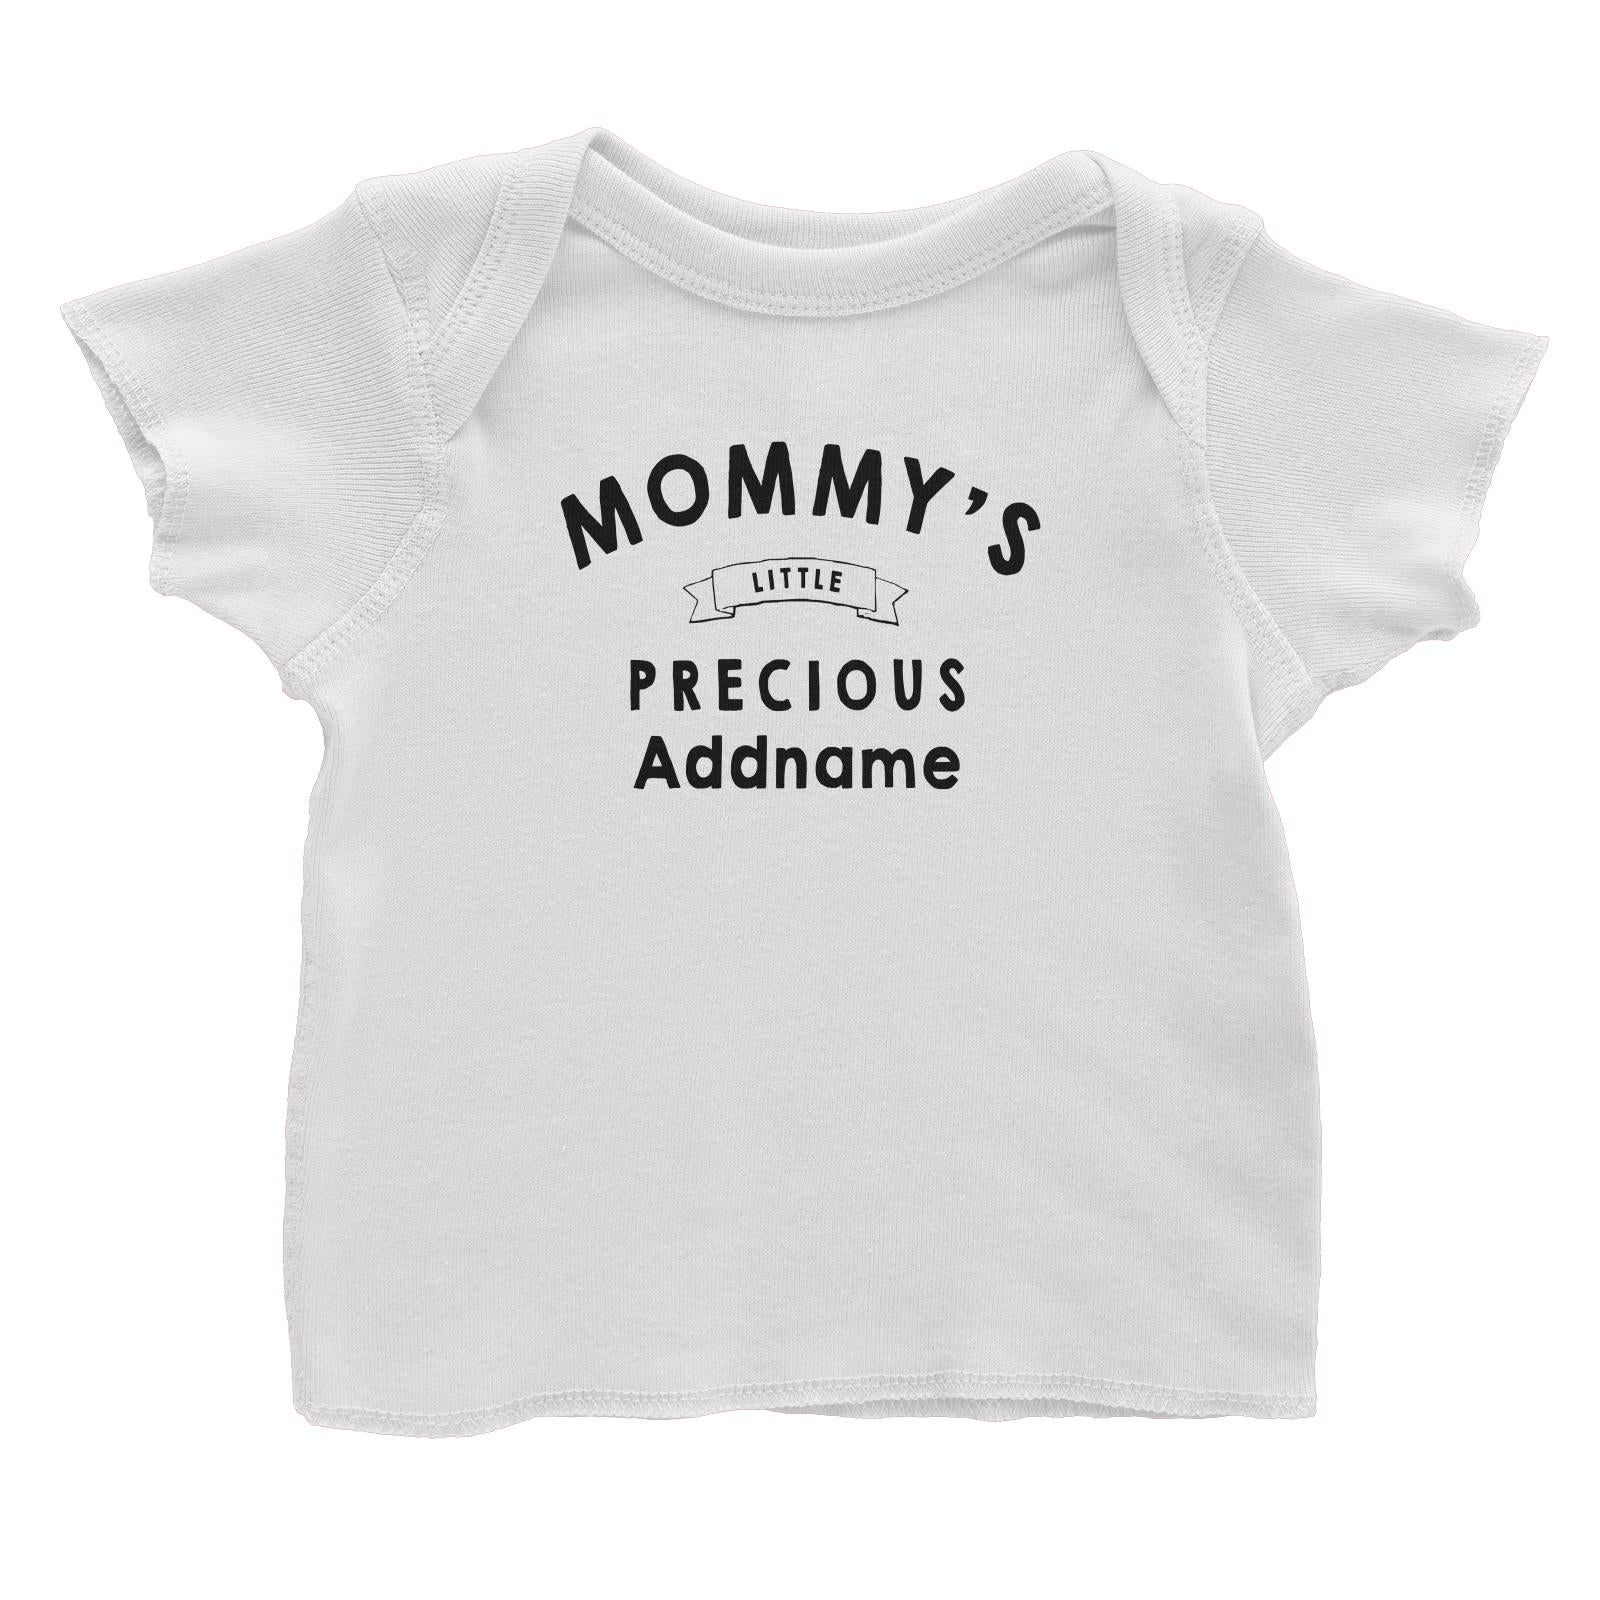 Mommy's Little Precious White Baby T-Shirt